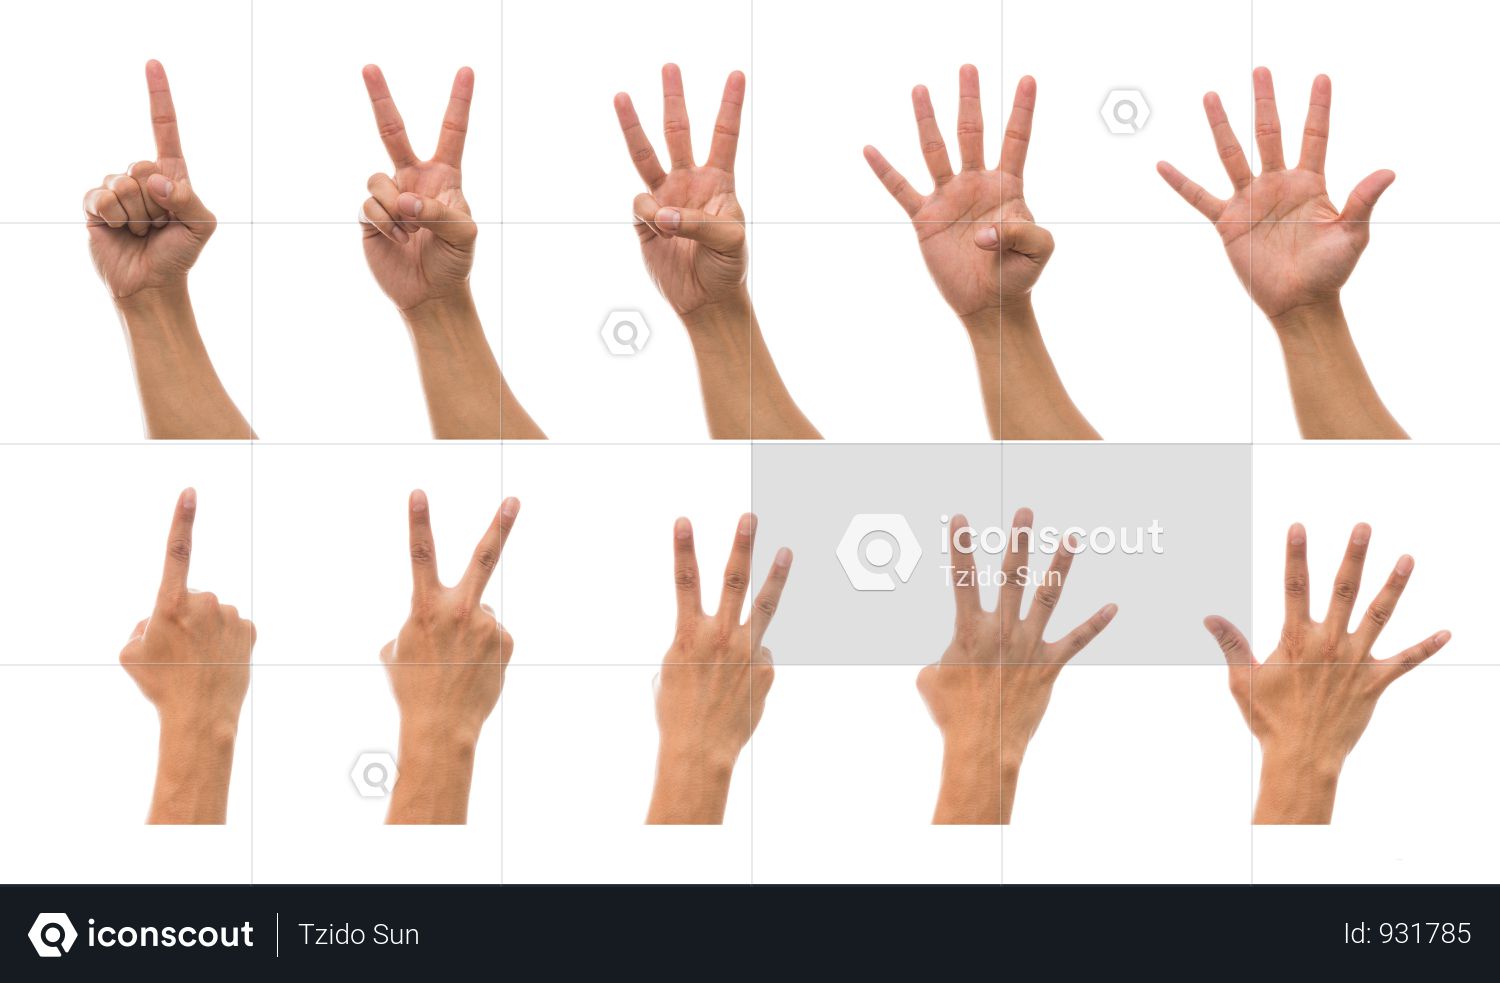 premium sum 5 picture of man hand in front and back side with show number  collection against white background photo download in png & jpg format